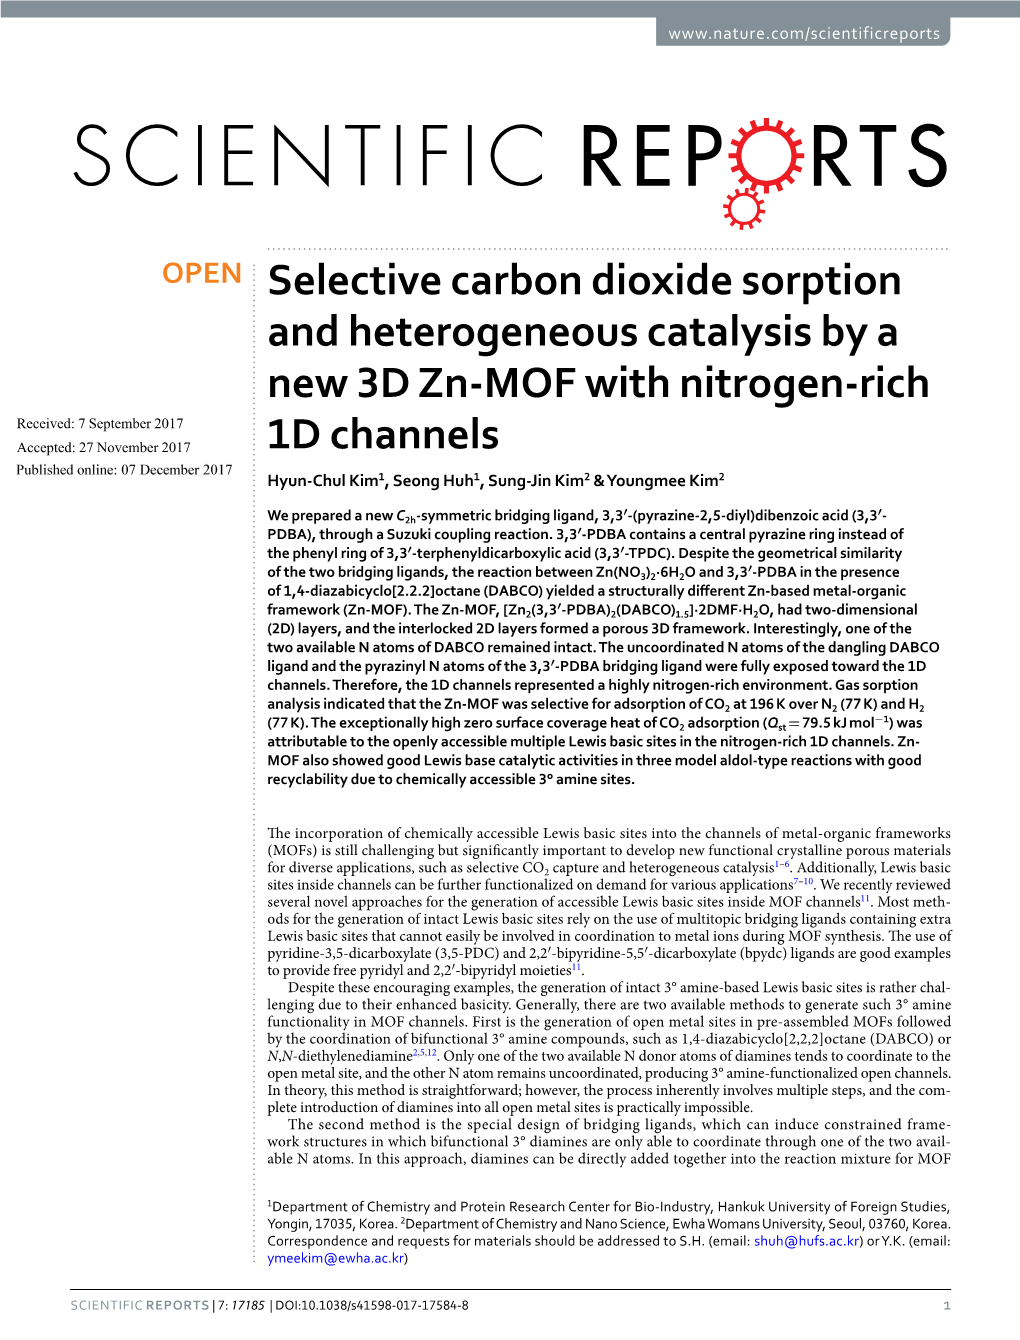 Selective Carbon Dioxide Sorption and Heterogeneous Catalysis by a New